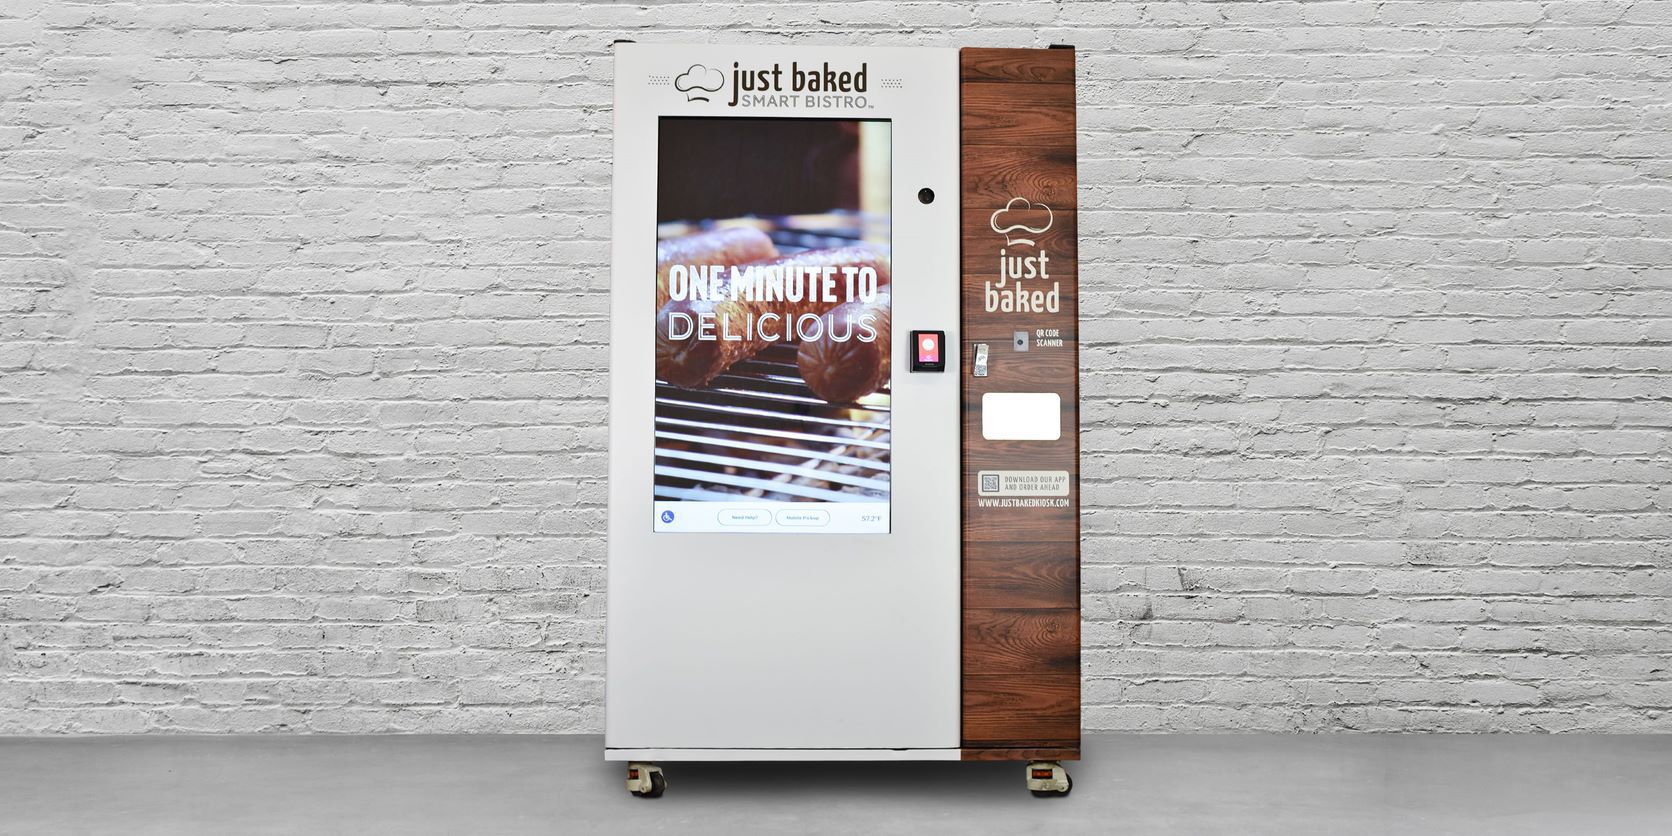 Introducing the Just Baked Kiosk - Art